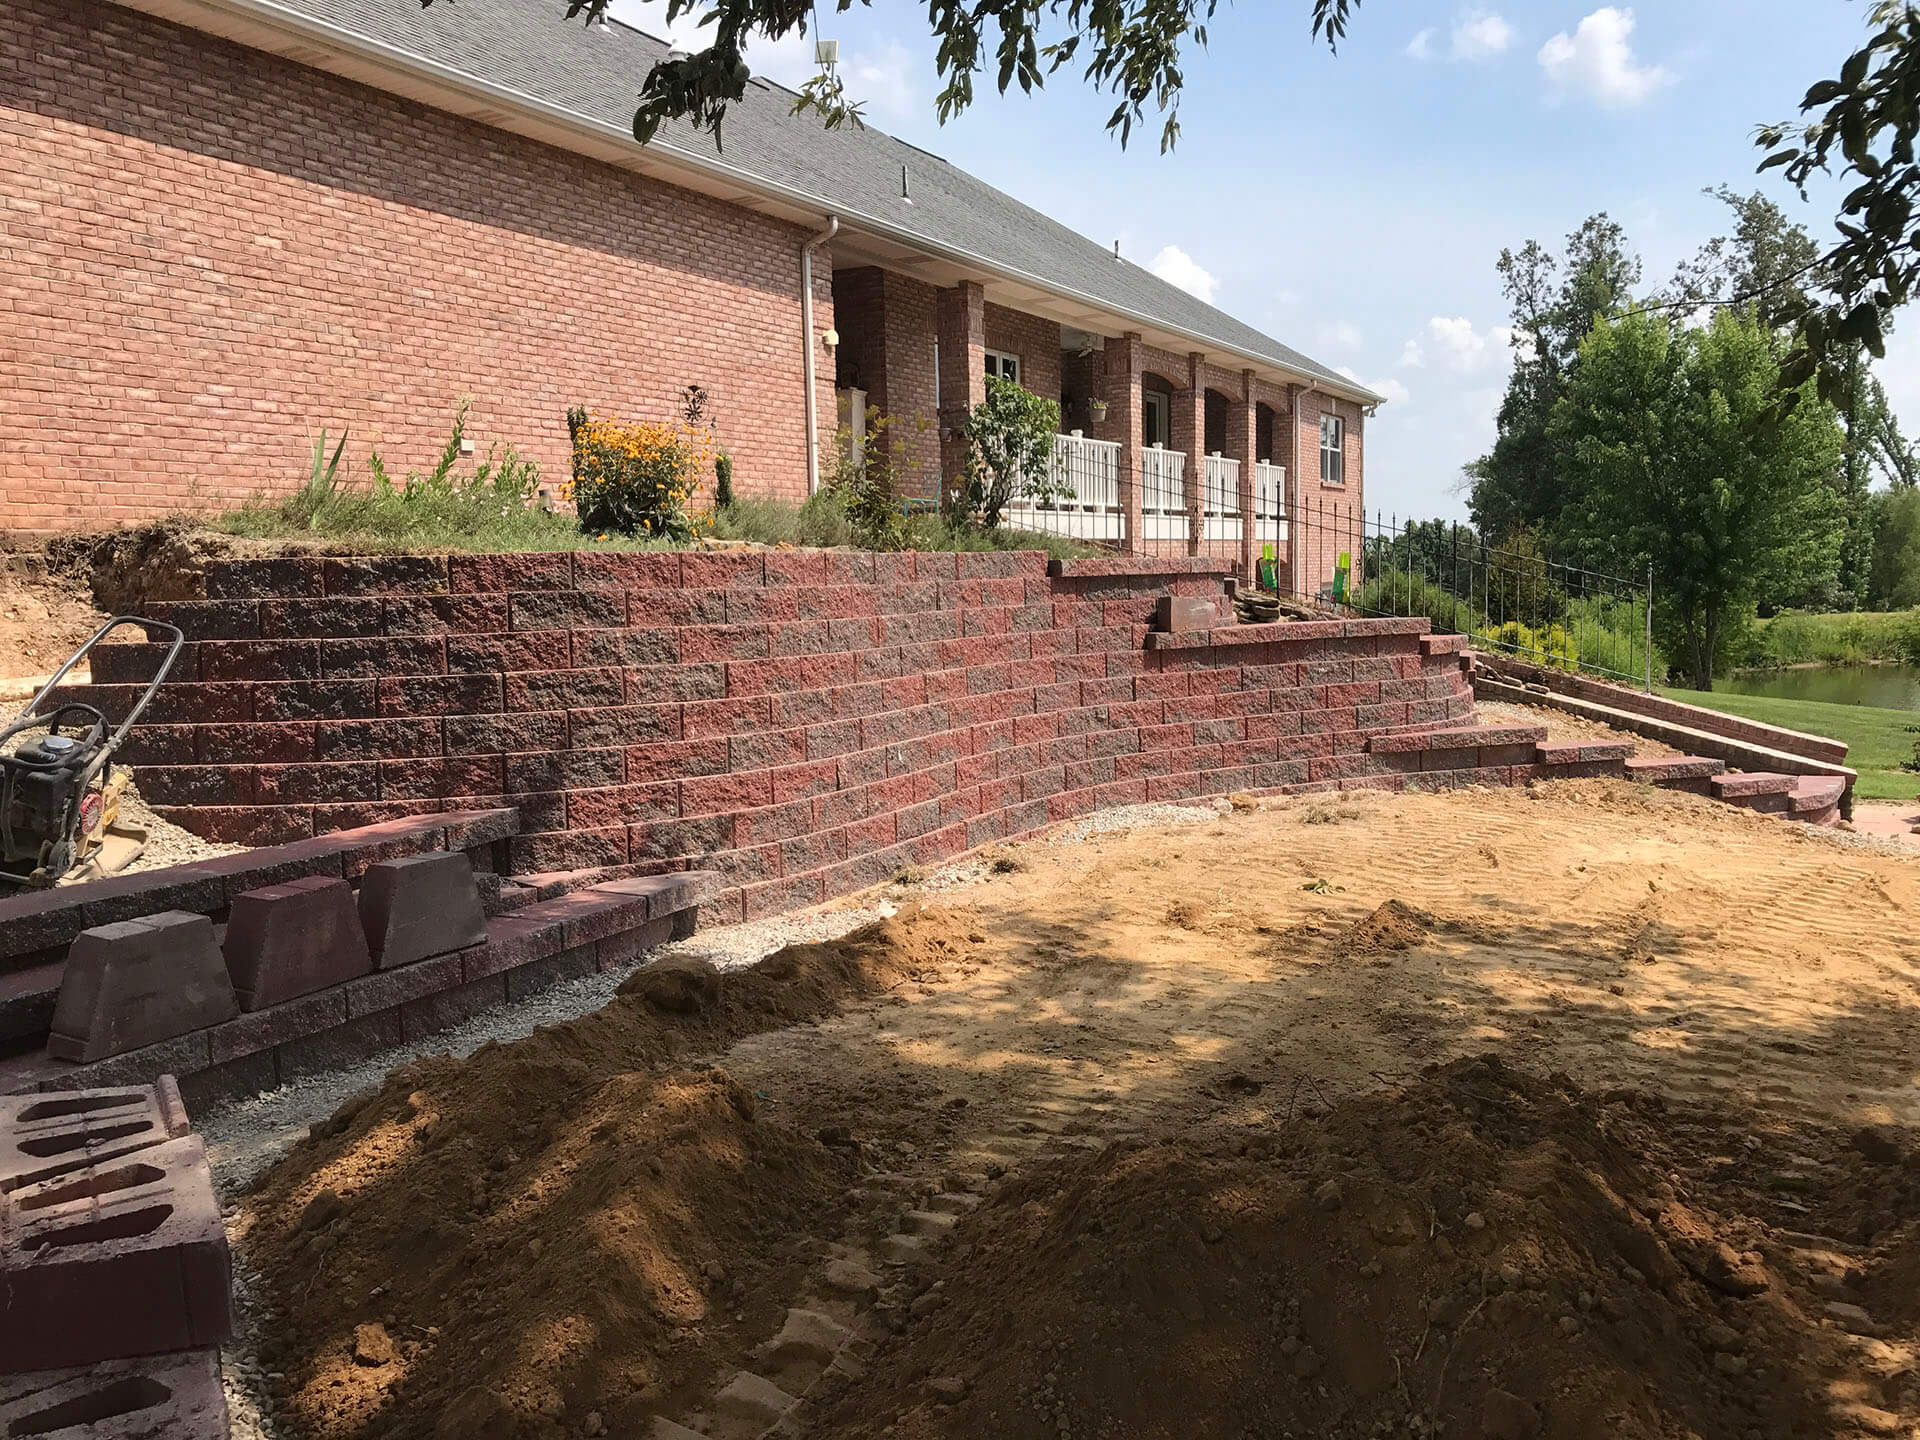 interlocking stone retaining wall at a home in Dexter, MO Project